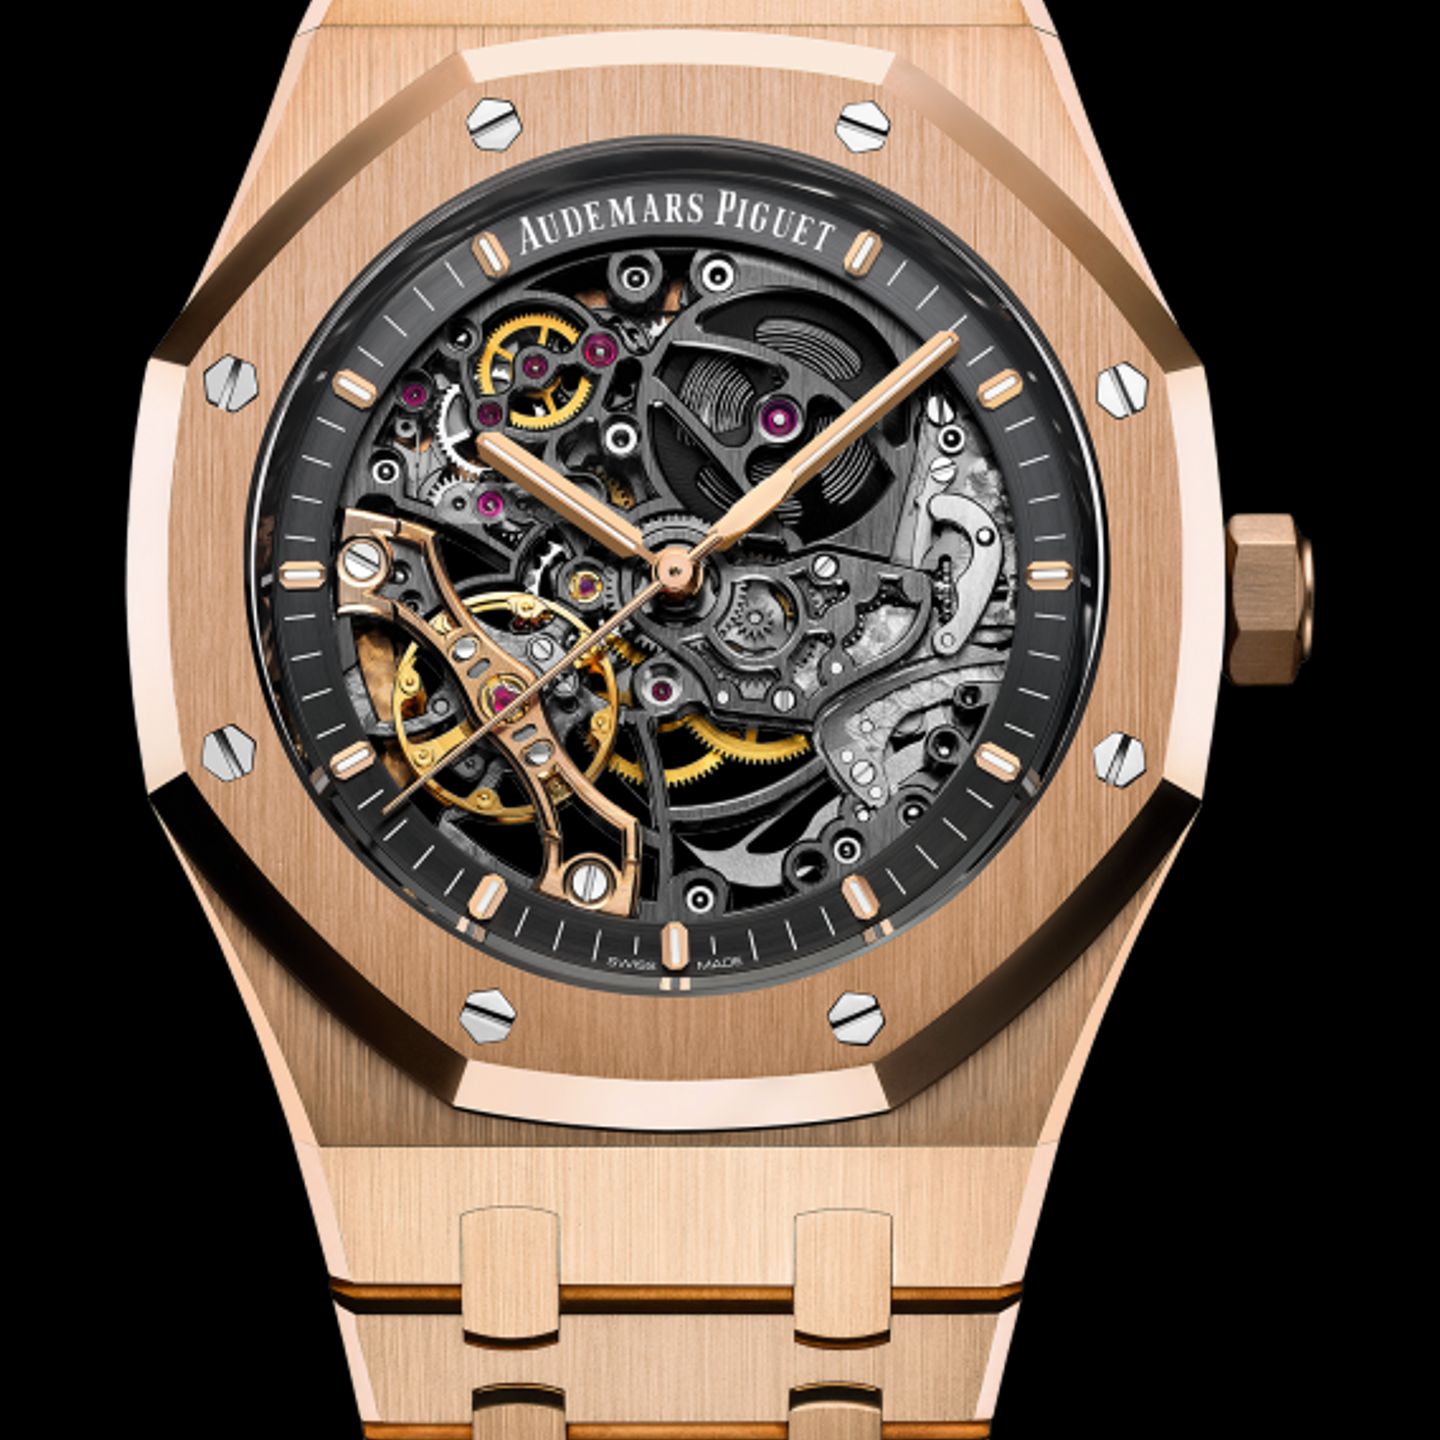 Audemars Piguet Royal Oak Double Balance Wheel Openworked 15407OR.OO.1220OR.01 (2022) - Transparent dial 41 mm Rose Gold case (1/1)